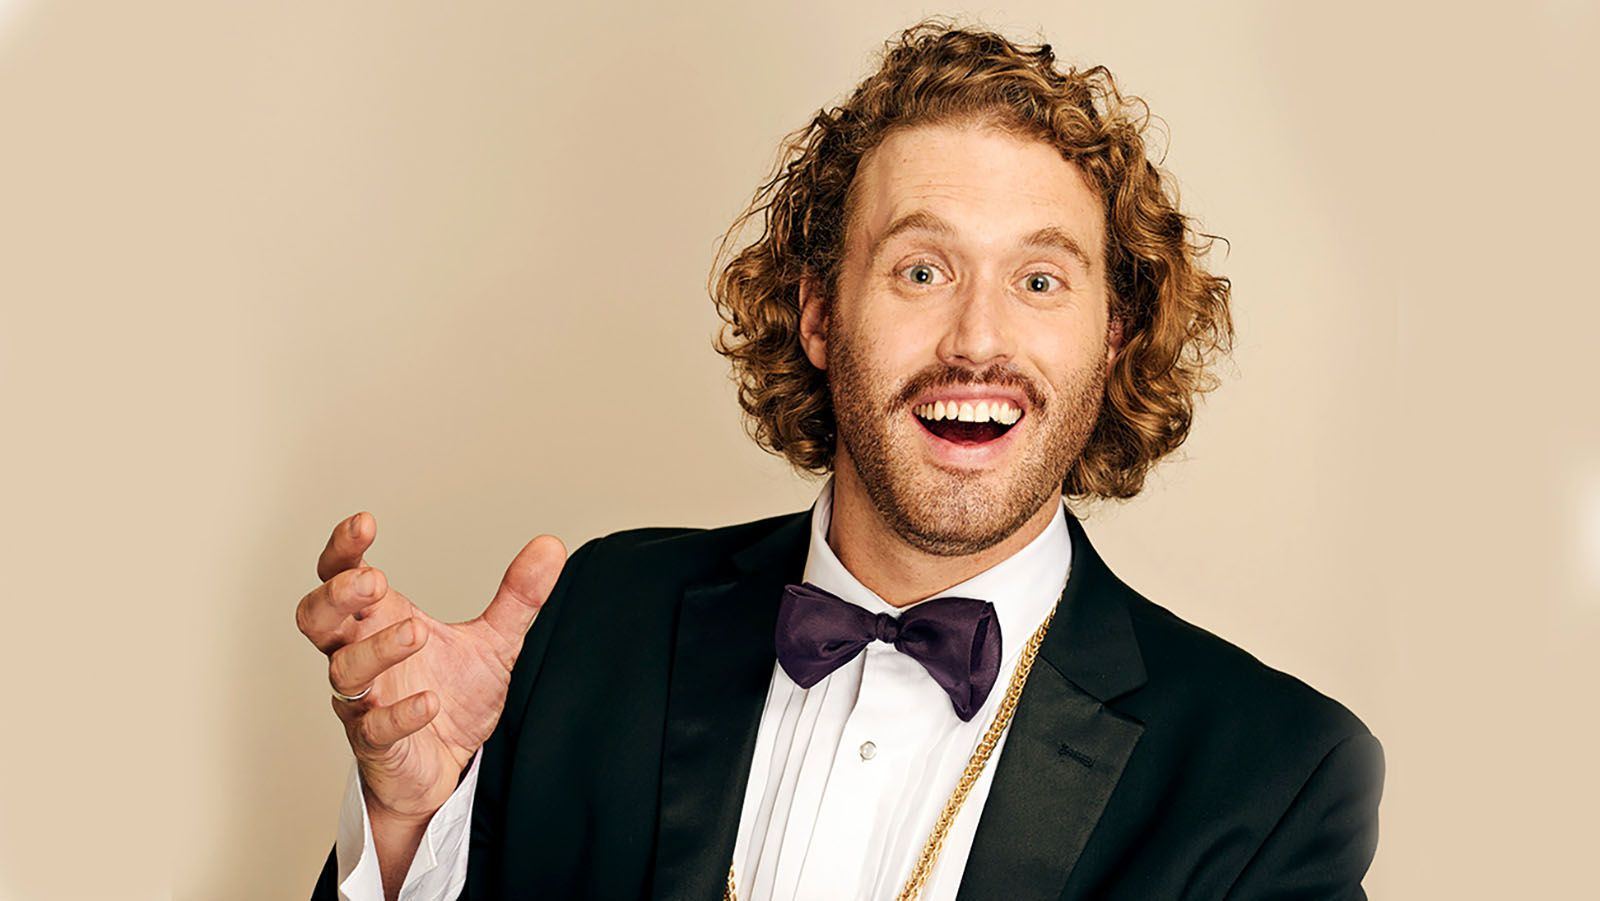 T.J. Miller will be at Summit City Comedy Club on Sept. 16-17.